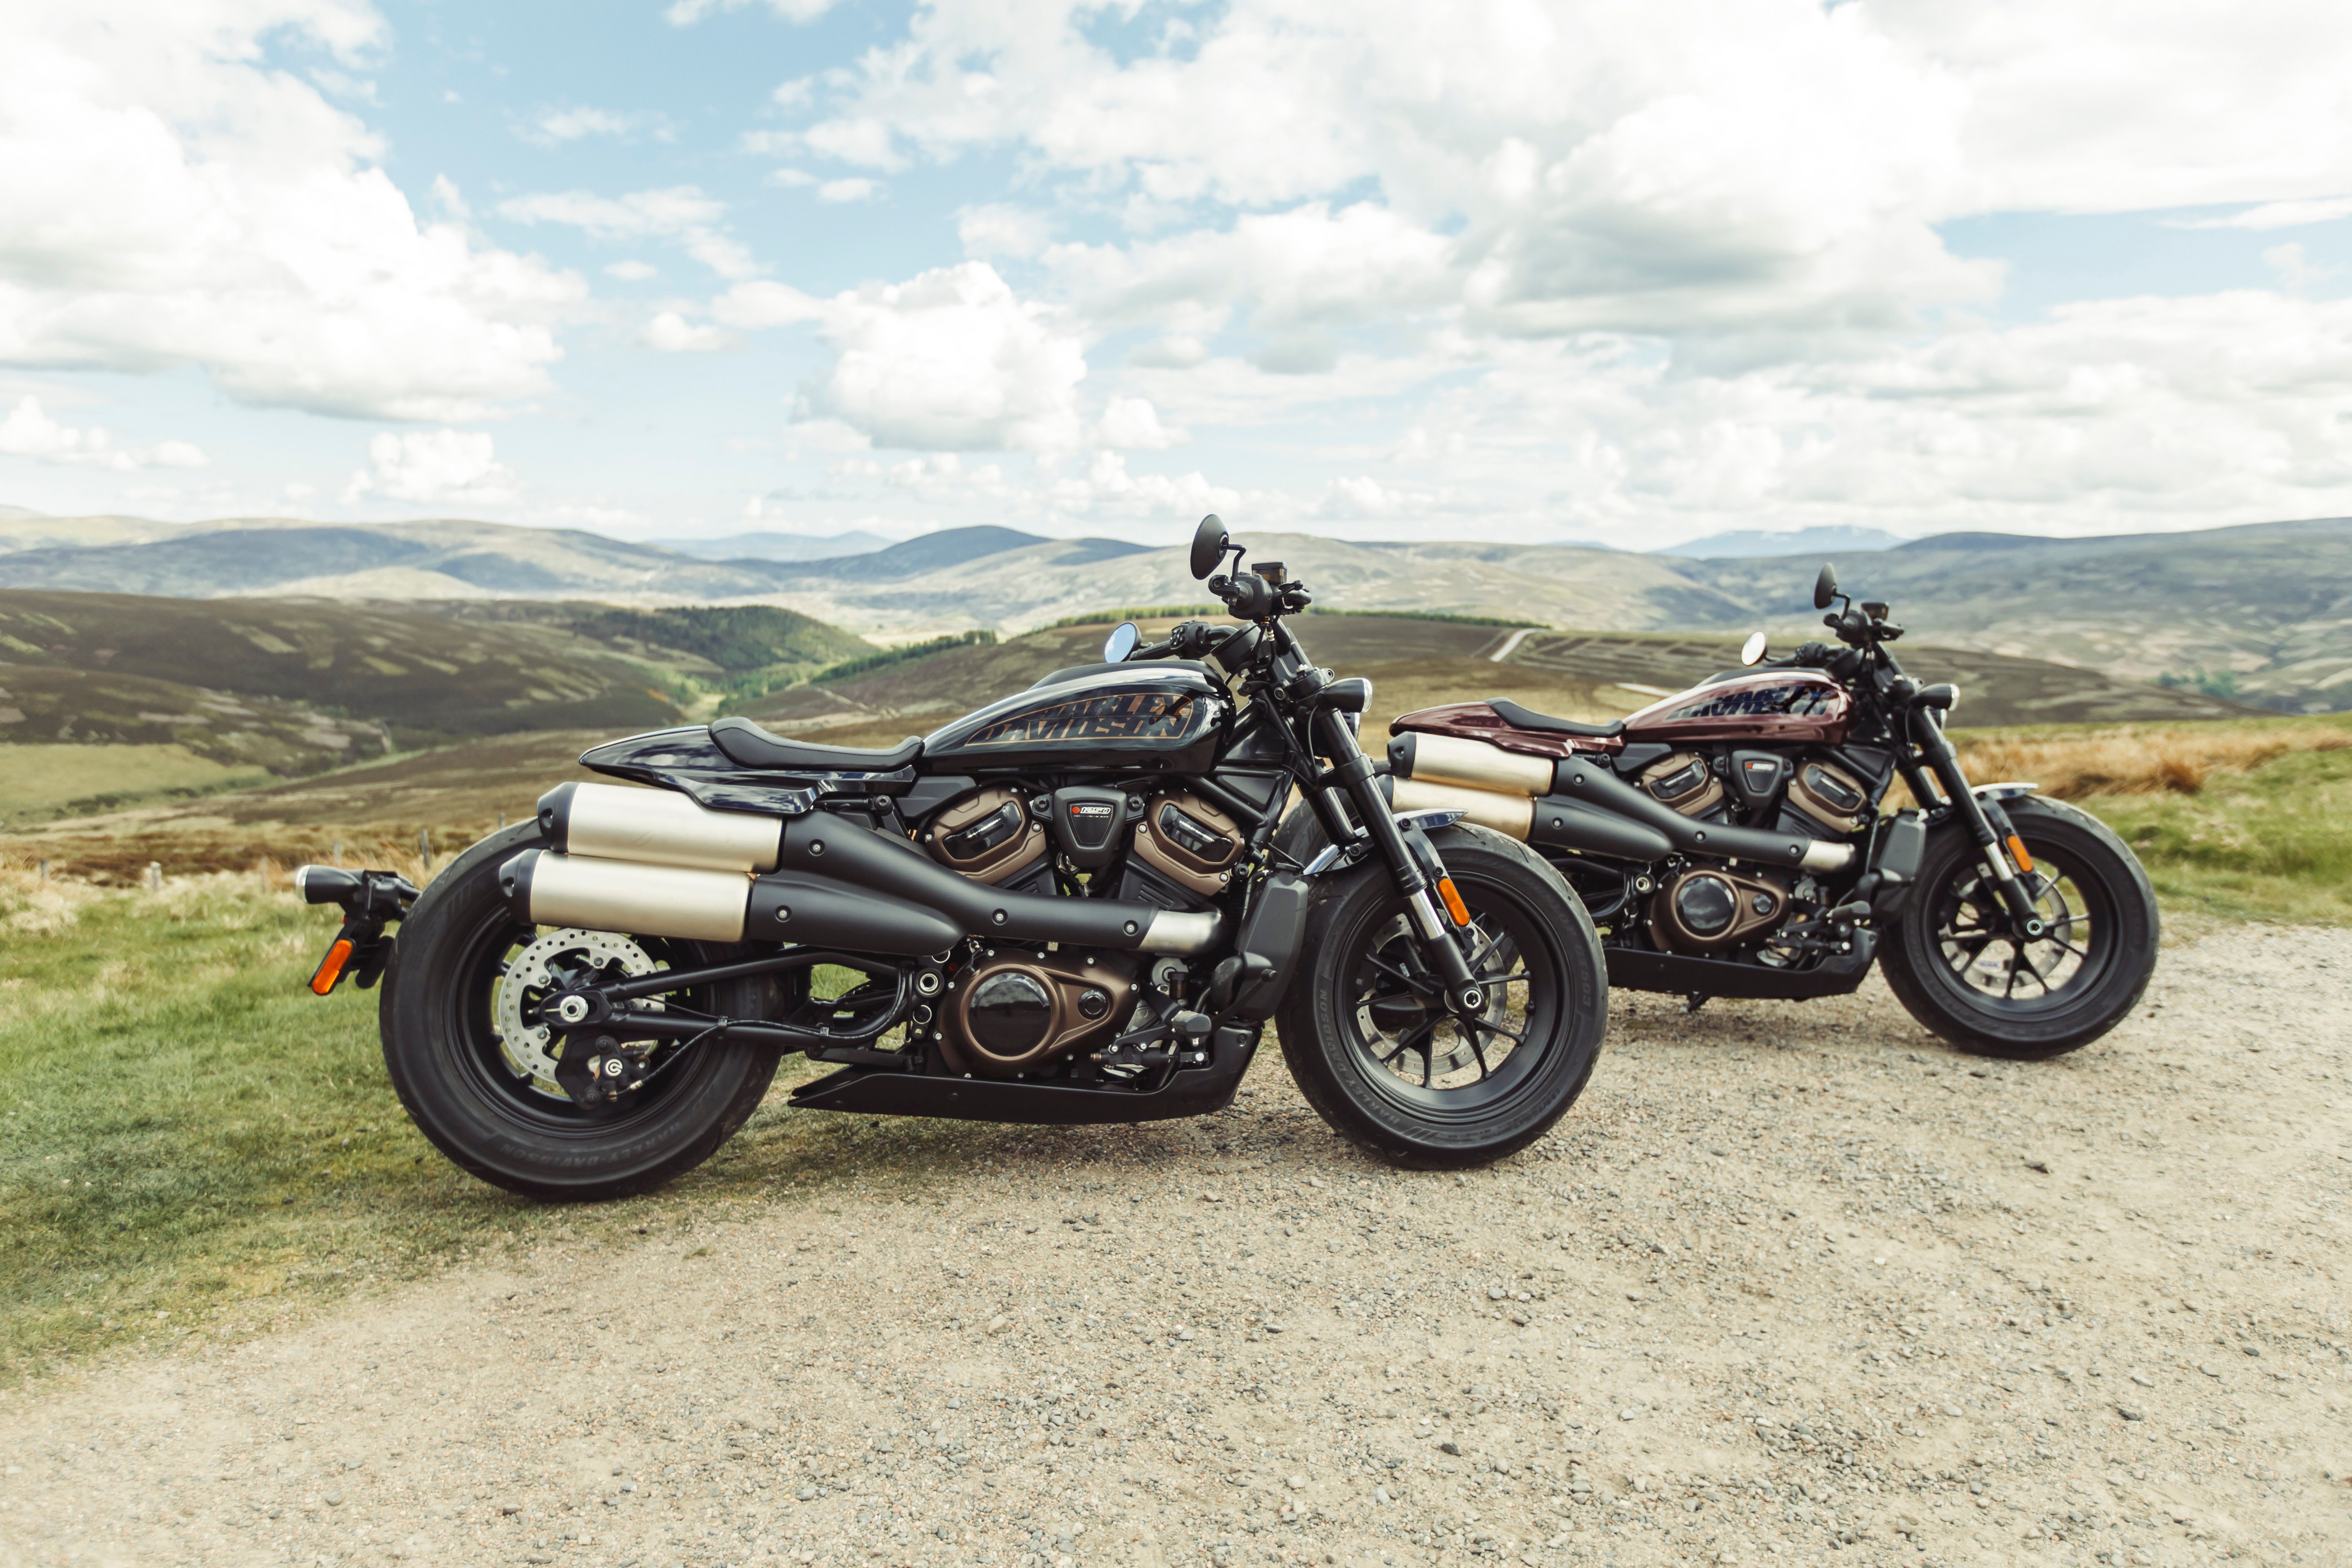 2022 Harley-Davidson Sportster S - Performance, Price, and Photos